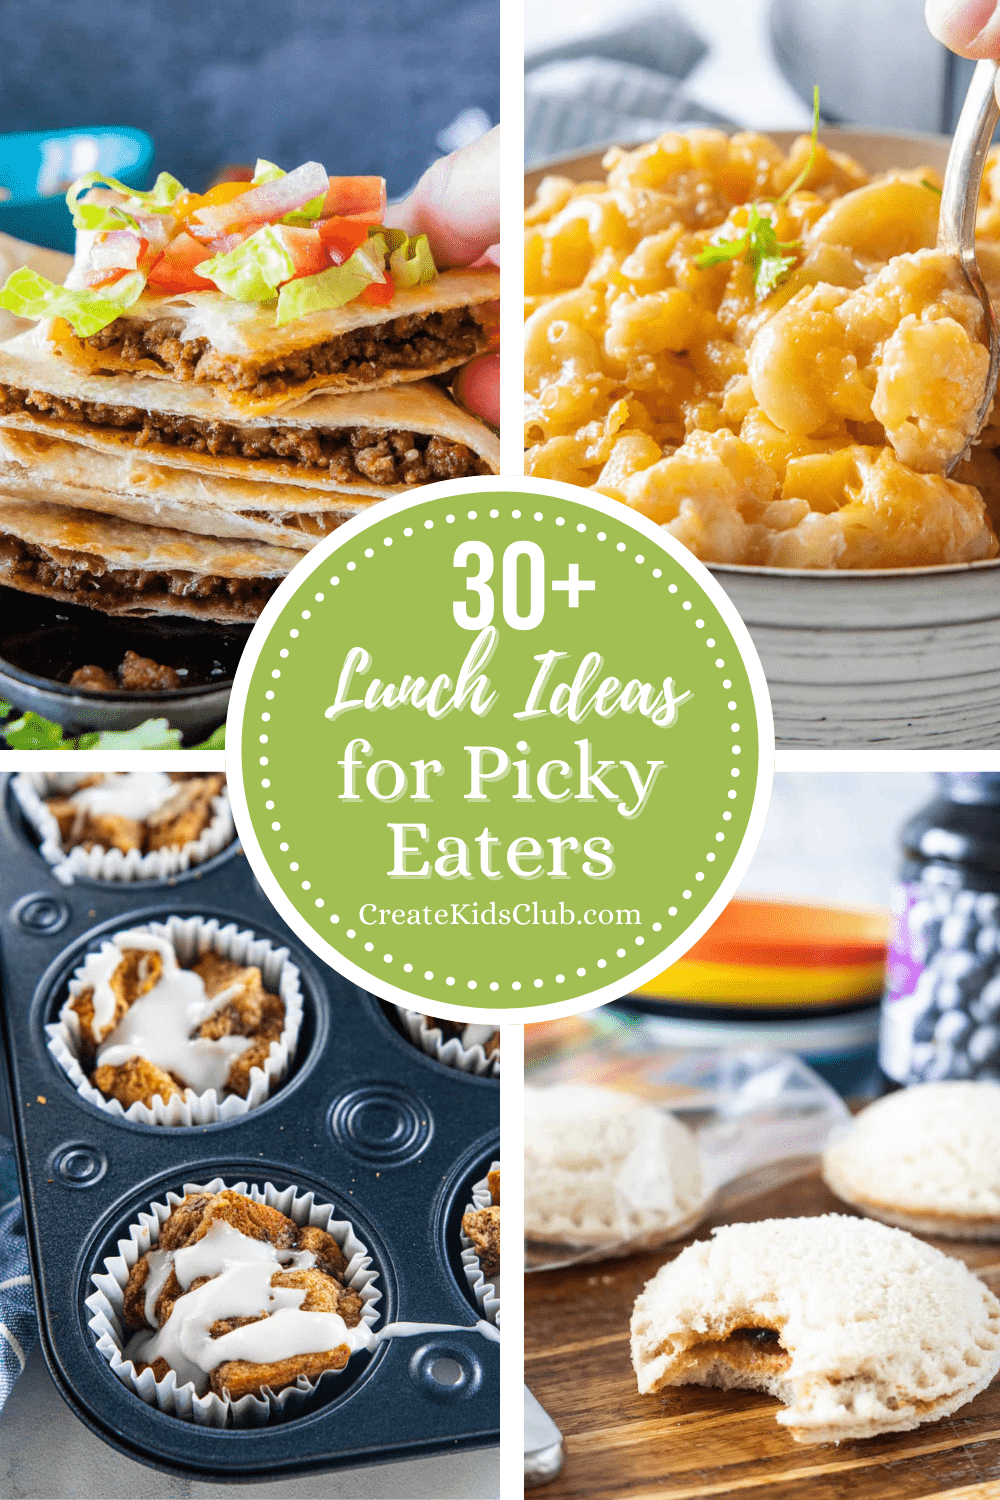 30+ Lunch Ideas for Picky Eaters